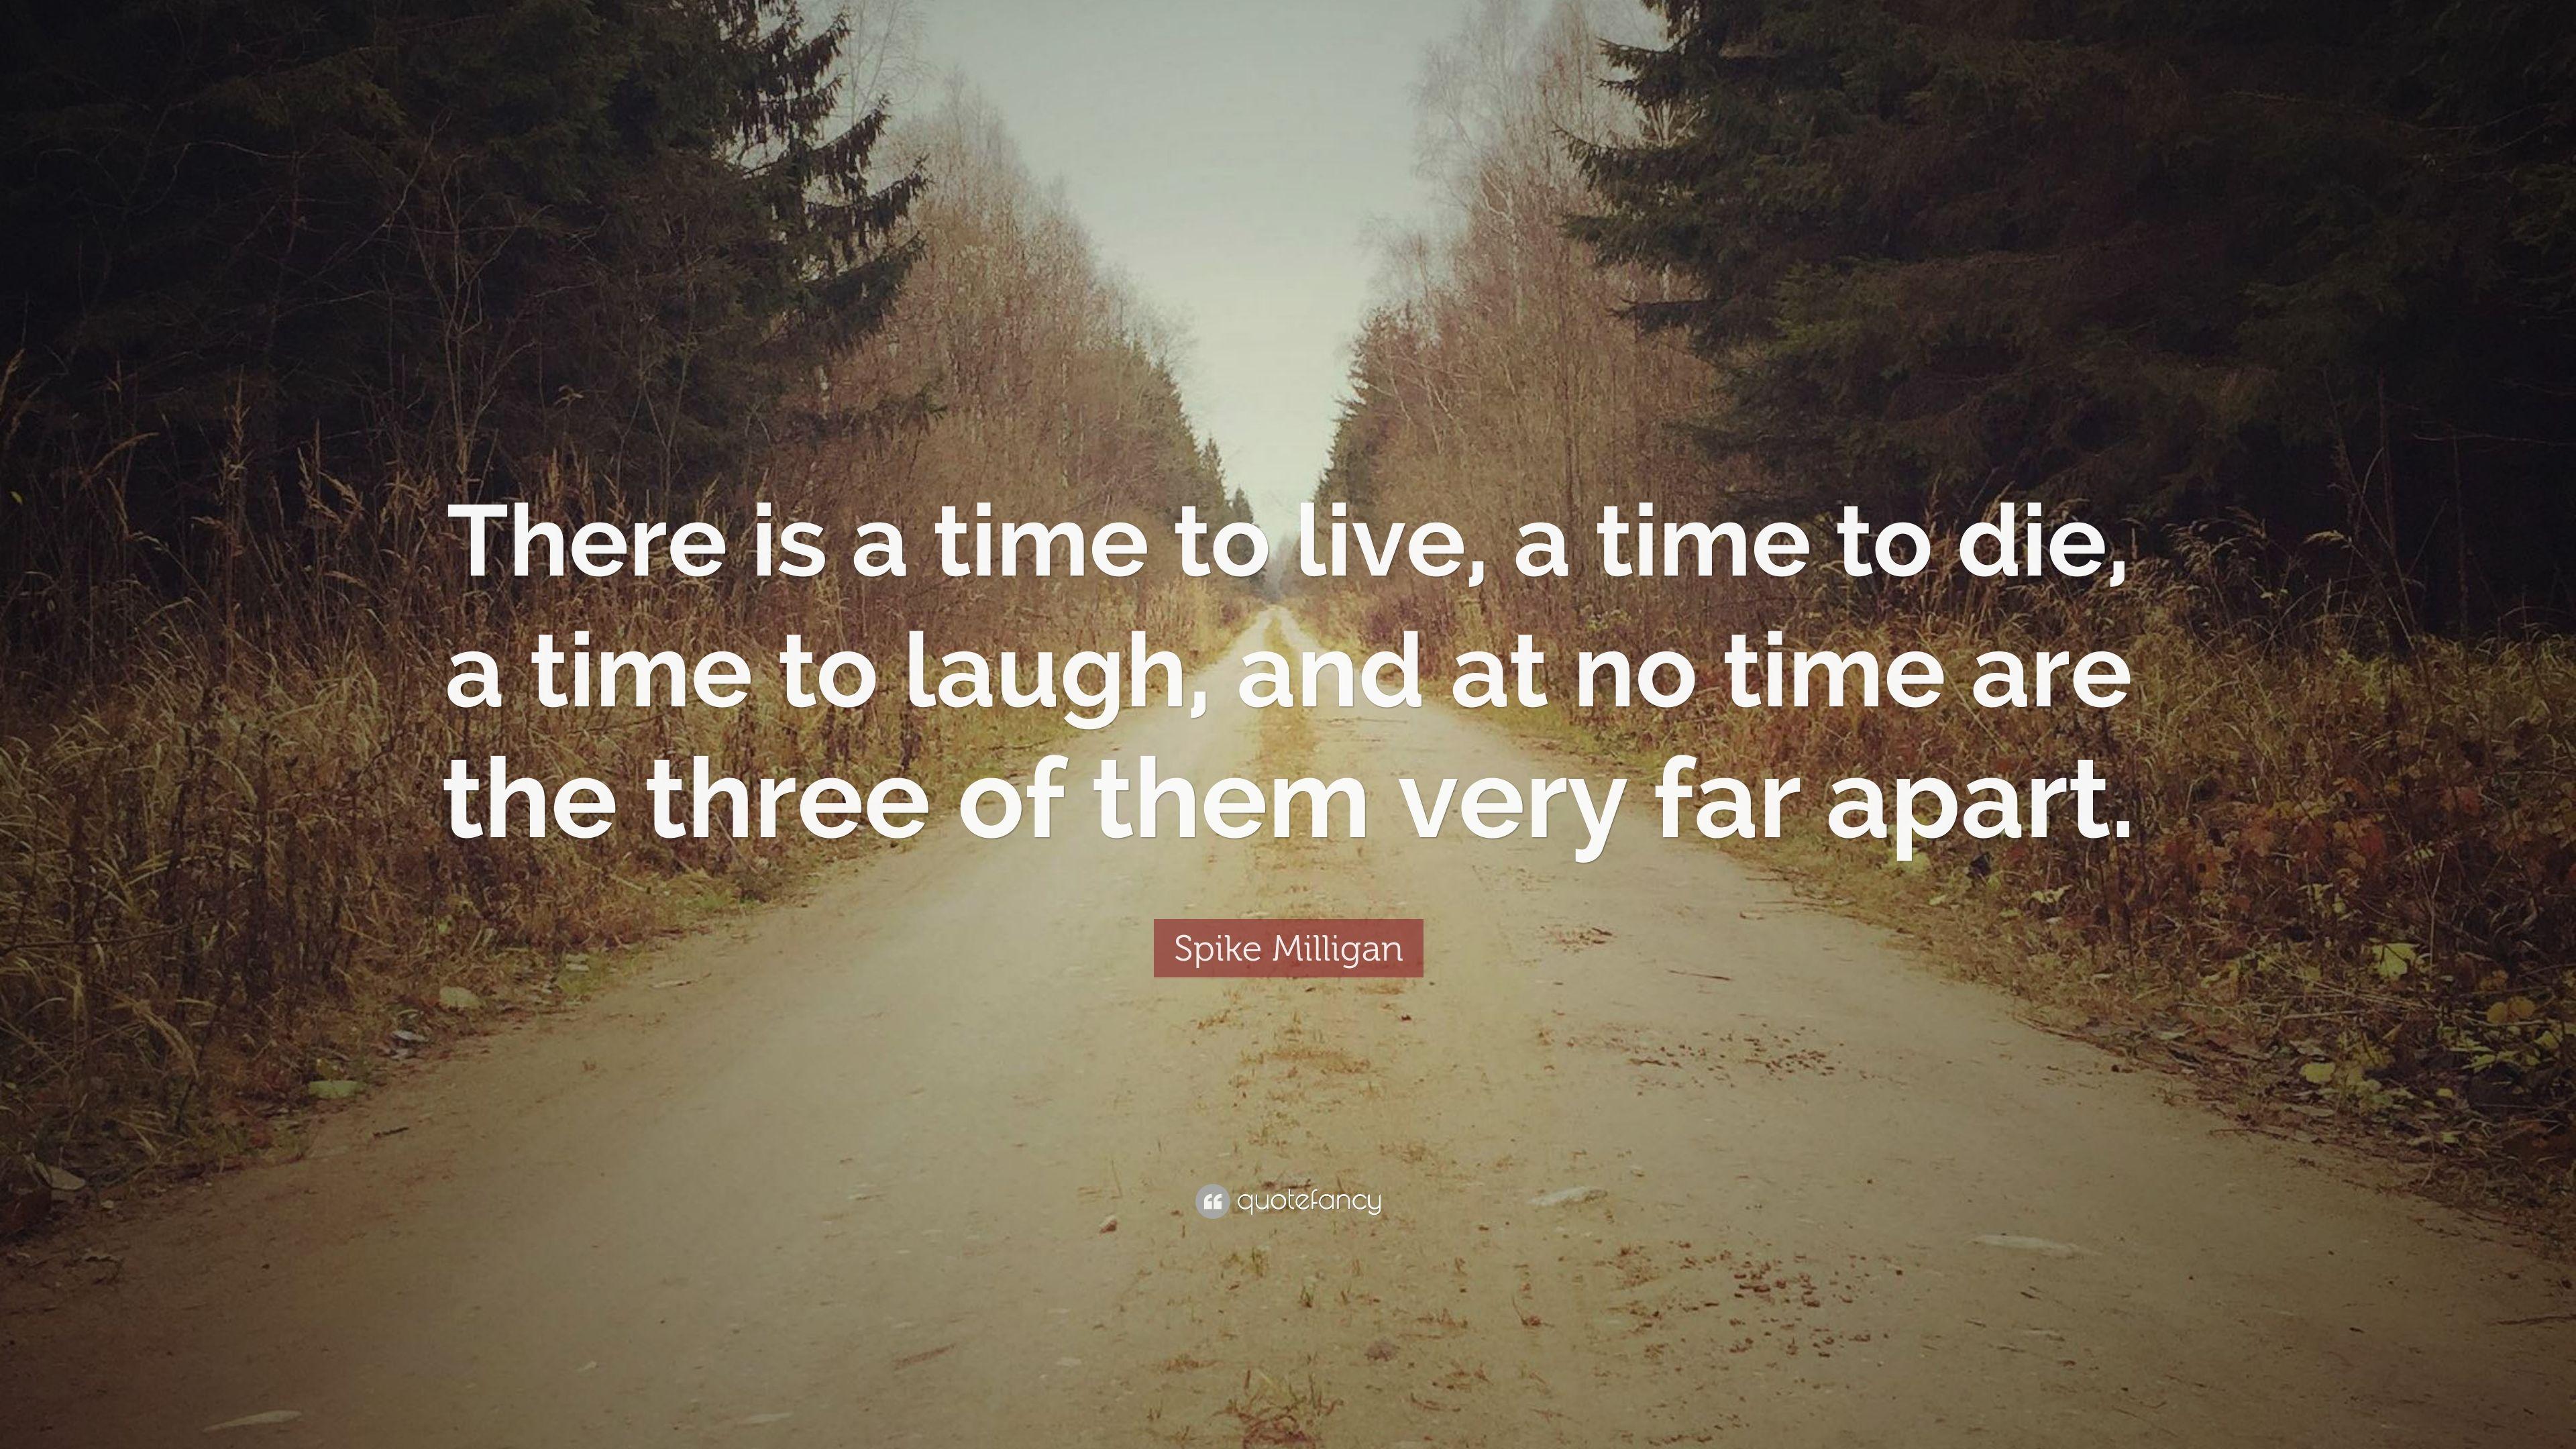 Spike Milligan Quote: “There is a time to live, a time to